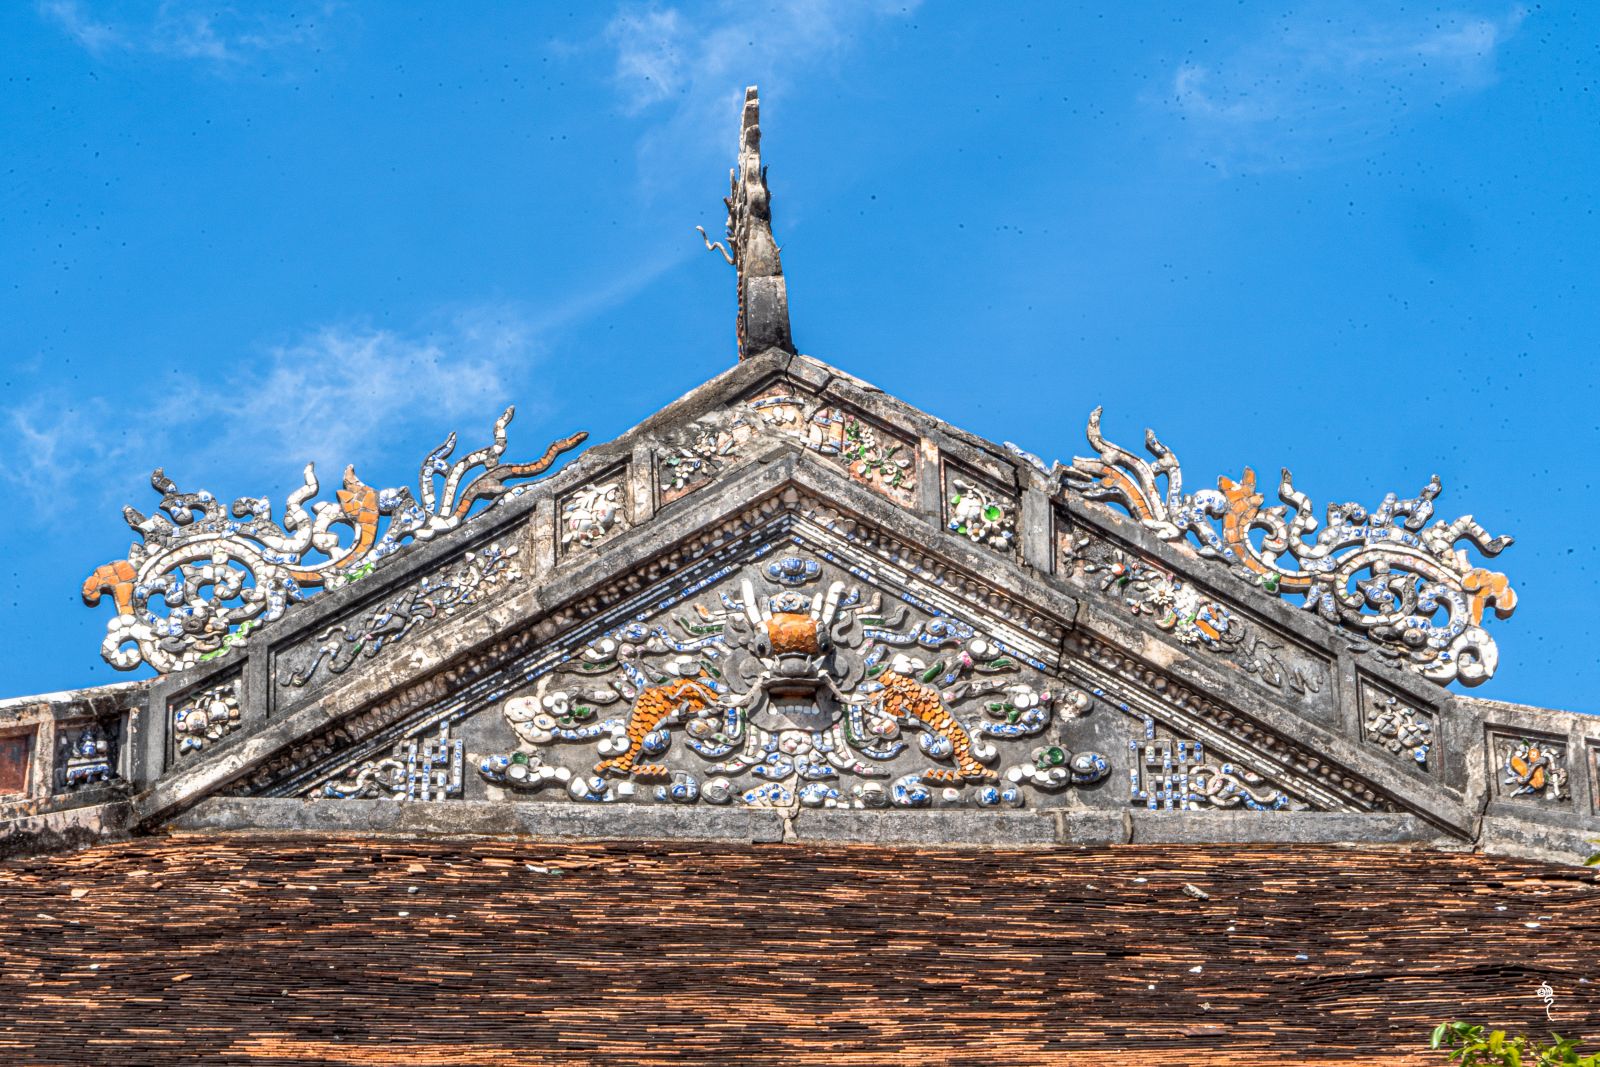 The image of dragon-faced and a tiger-faced design at the reception hall and the main hall of Thai Hoa Palace